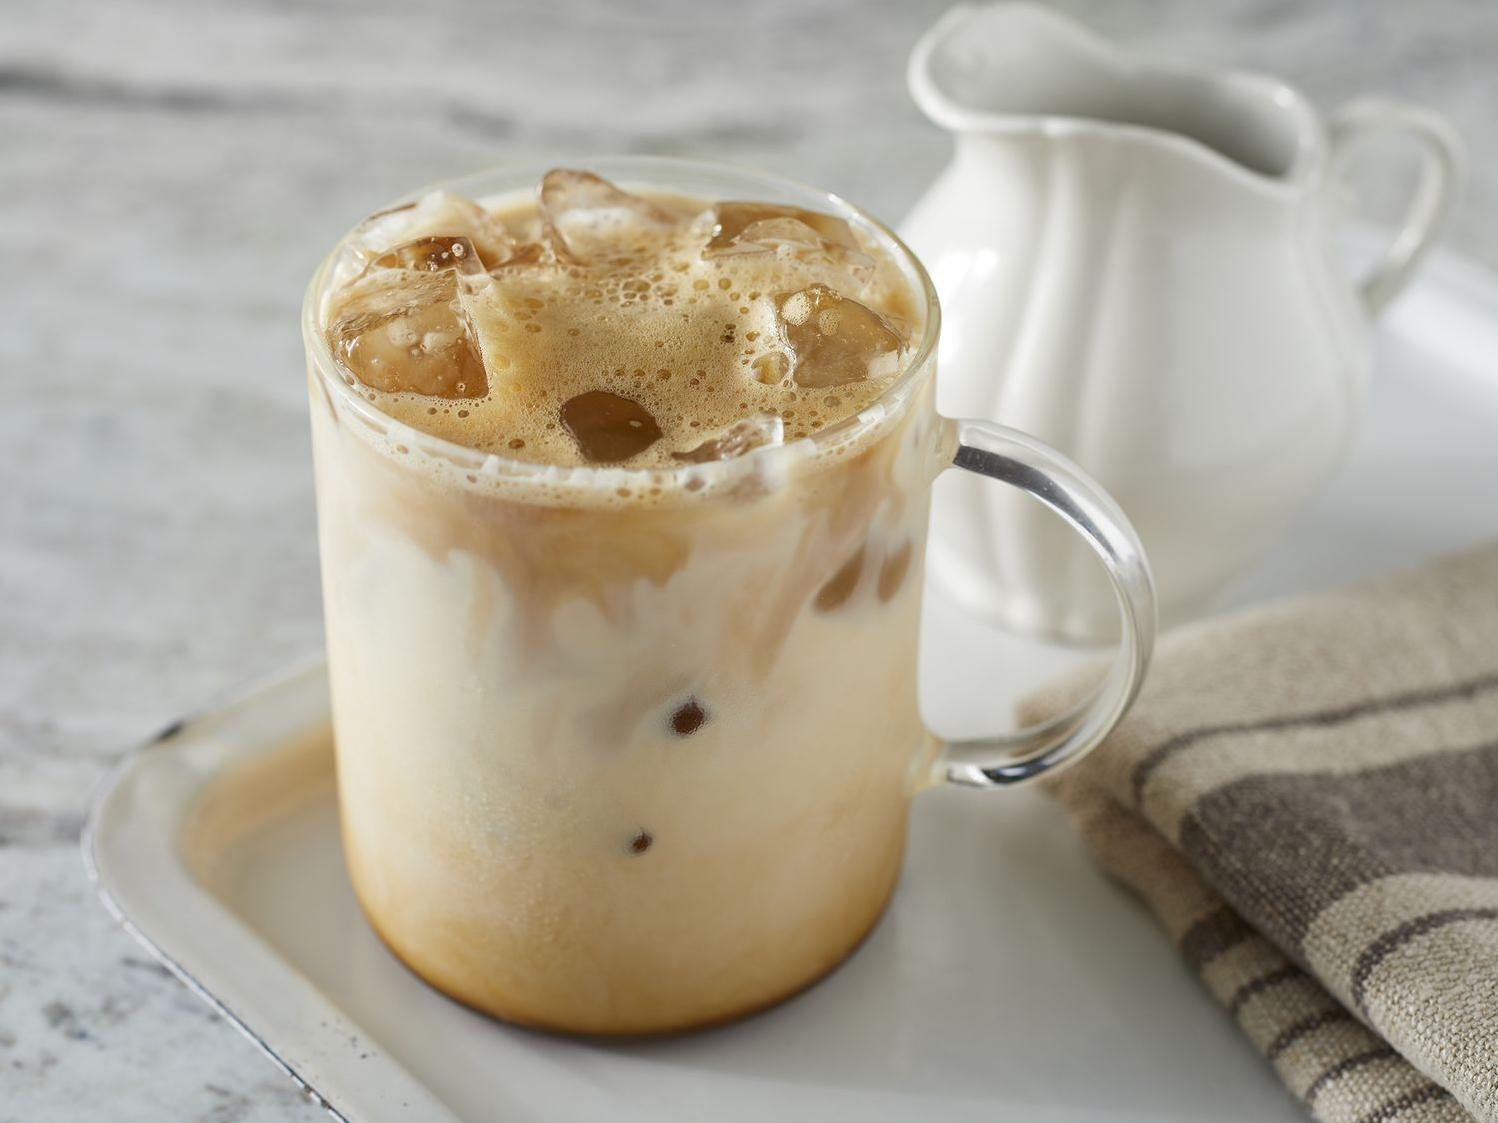  Chill out with a glass of perfectly brewed iced coffee.